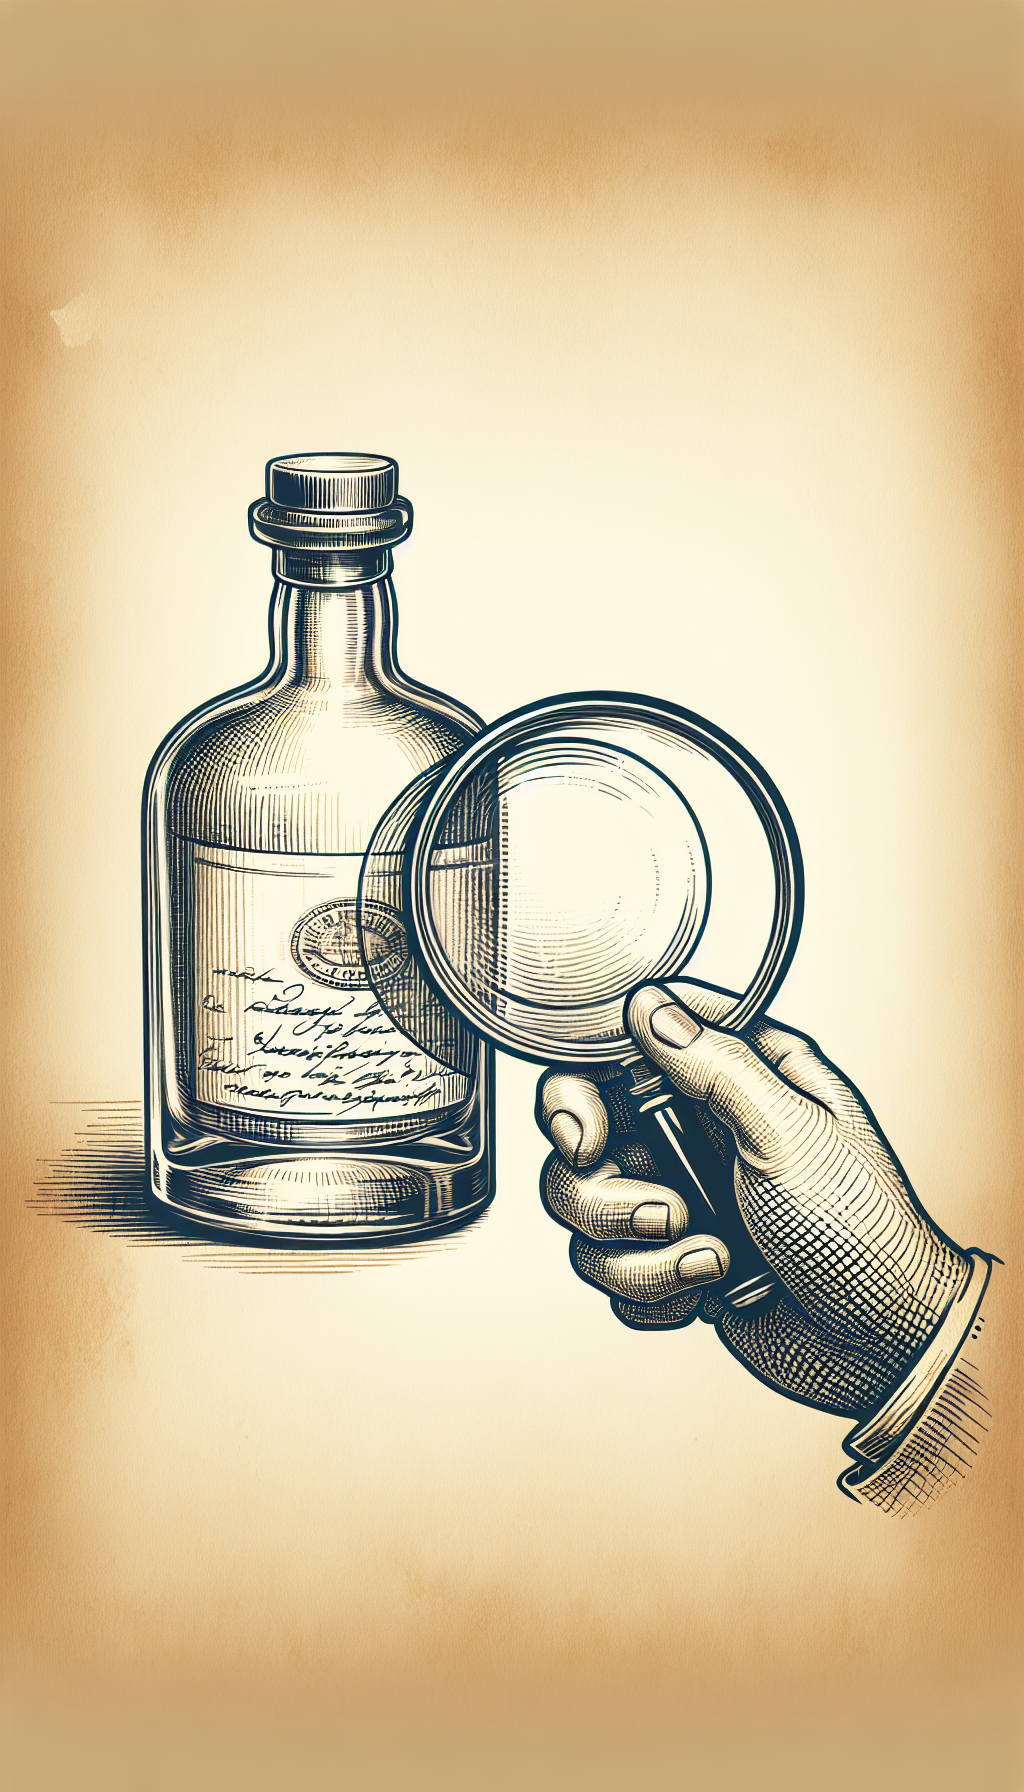 An intricate illustration depicts an ancient whiskey bottle with translucent glass, inside which a magnifying glass hovers, focusing on the embossed signature of the maker on the bottle's base. The rest of the bottle softly blurs into sketchy sepia outlines, juxtaposing the clarity of discovery against the misty mysteries of antiquity.